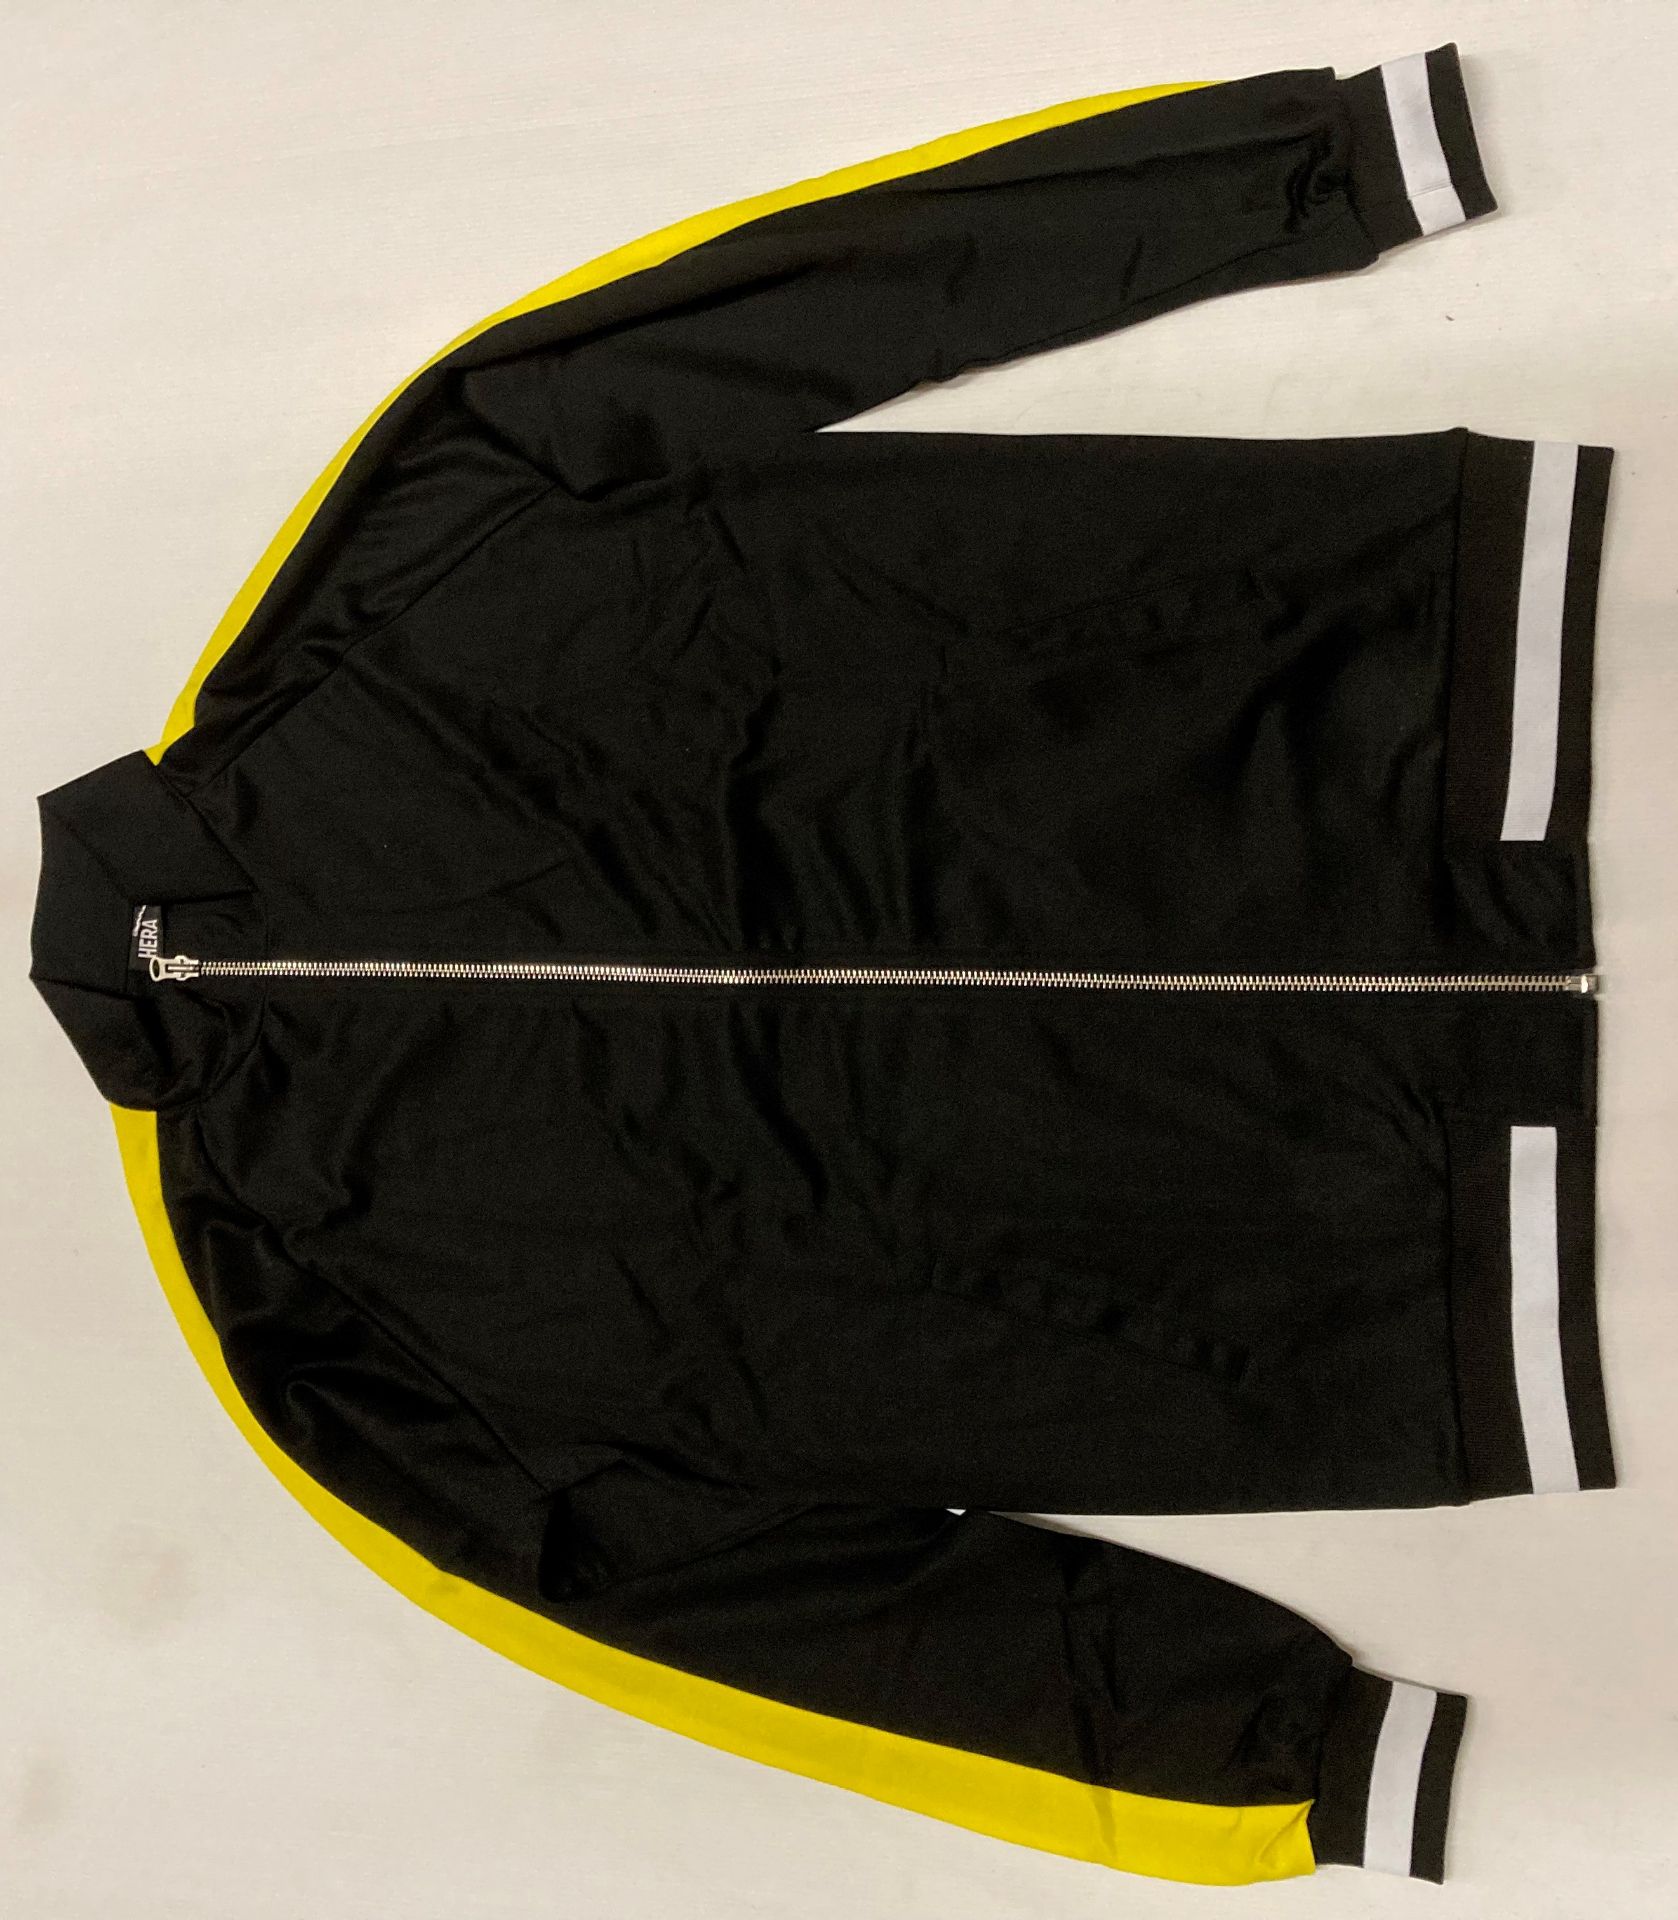 6 x Hera yellow and black track jackets (5 x size M and 1 x S) (location N05)